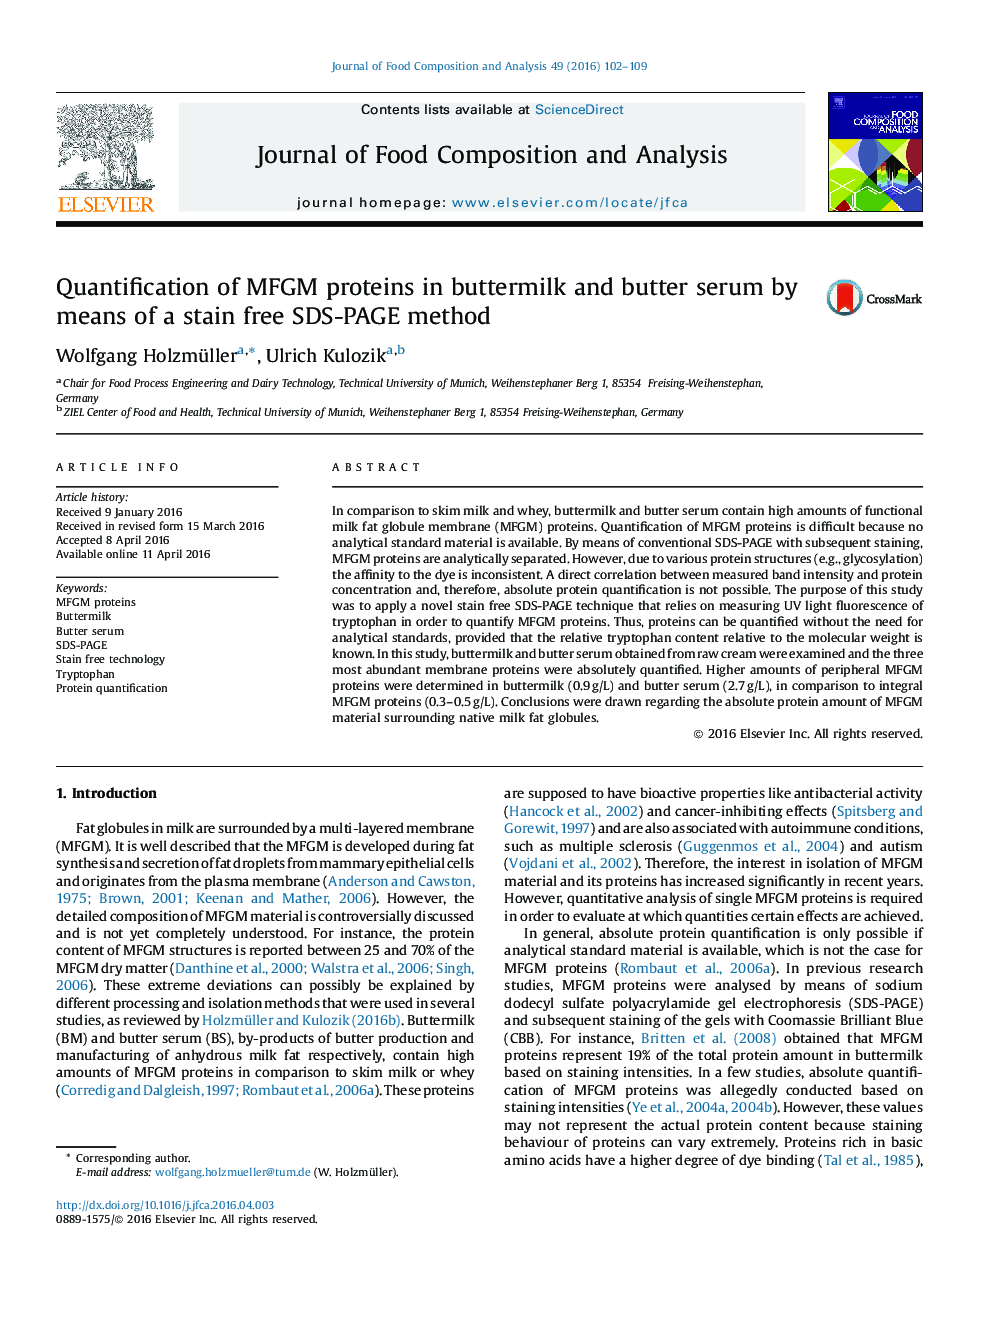 Quantification of MFGM proteins in buttermilk and butter serum by means of a stain free SDS-PAGE method